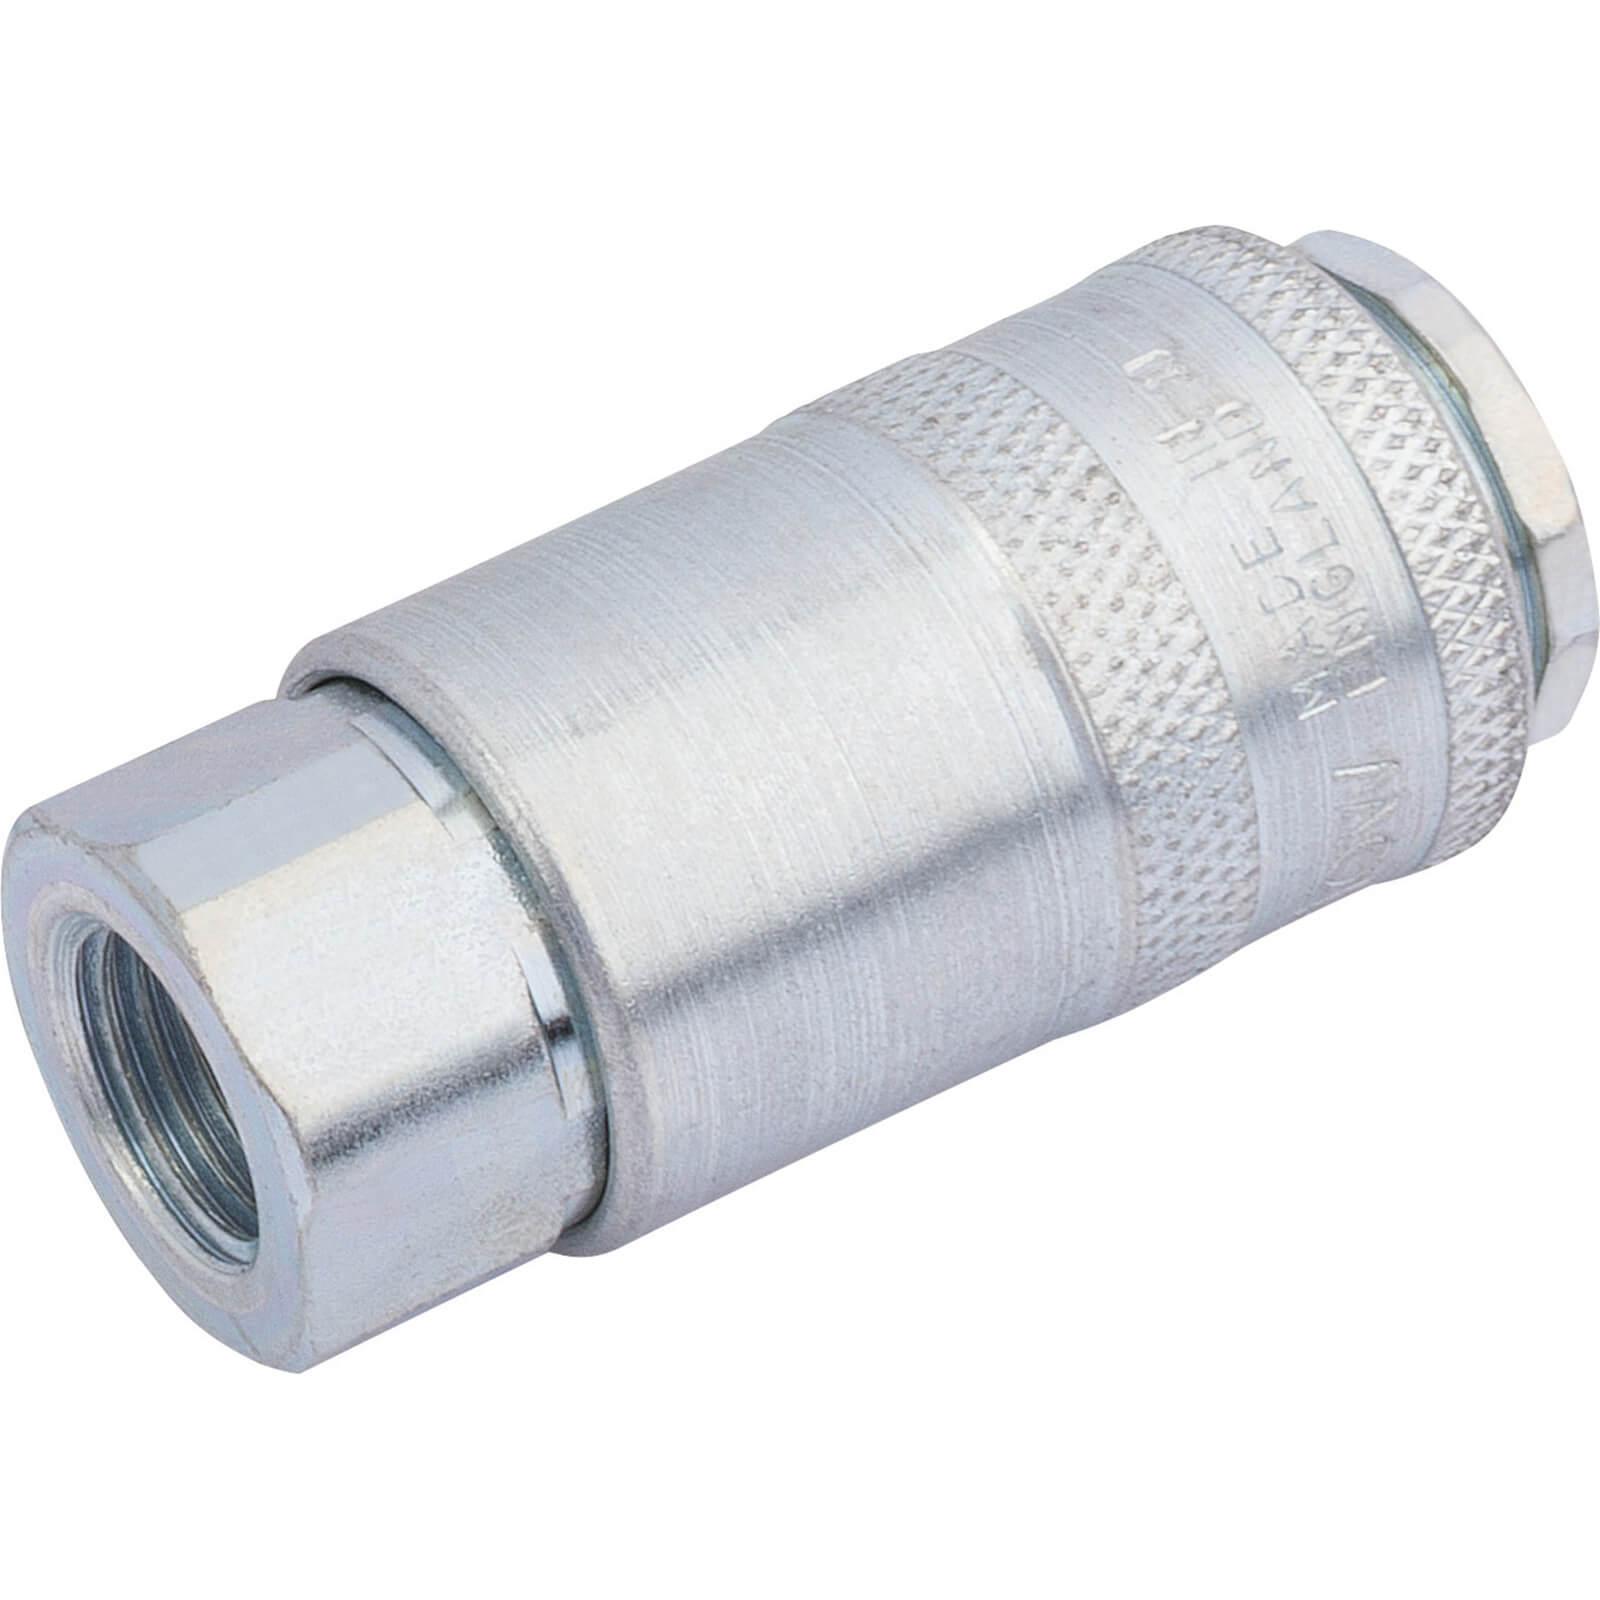 Image of Draper PCL Parallel Airflow Air Line Coupling BSP Female Thread 1/4" BSP Pack of 1